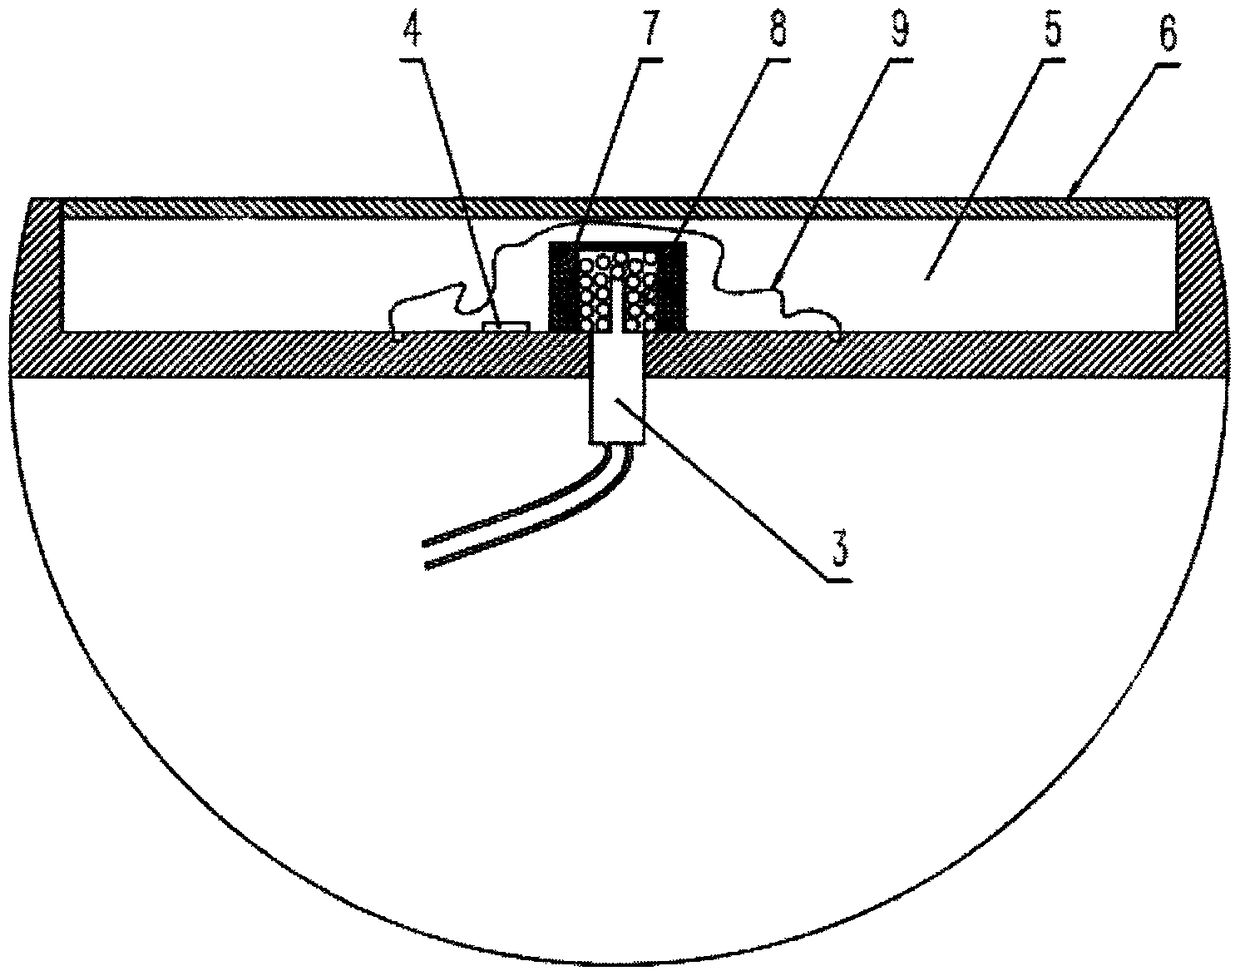 Automatic floating device and control method for underwater robot